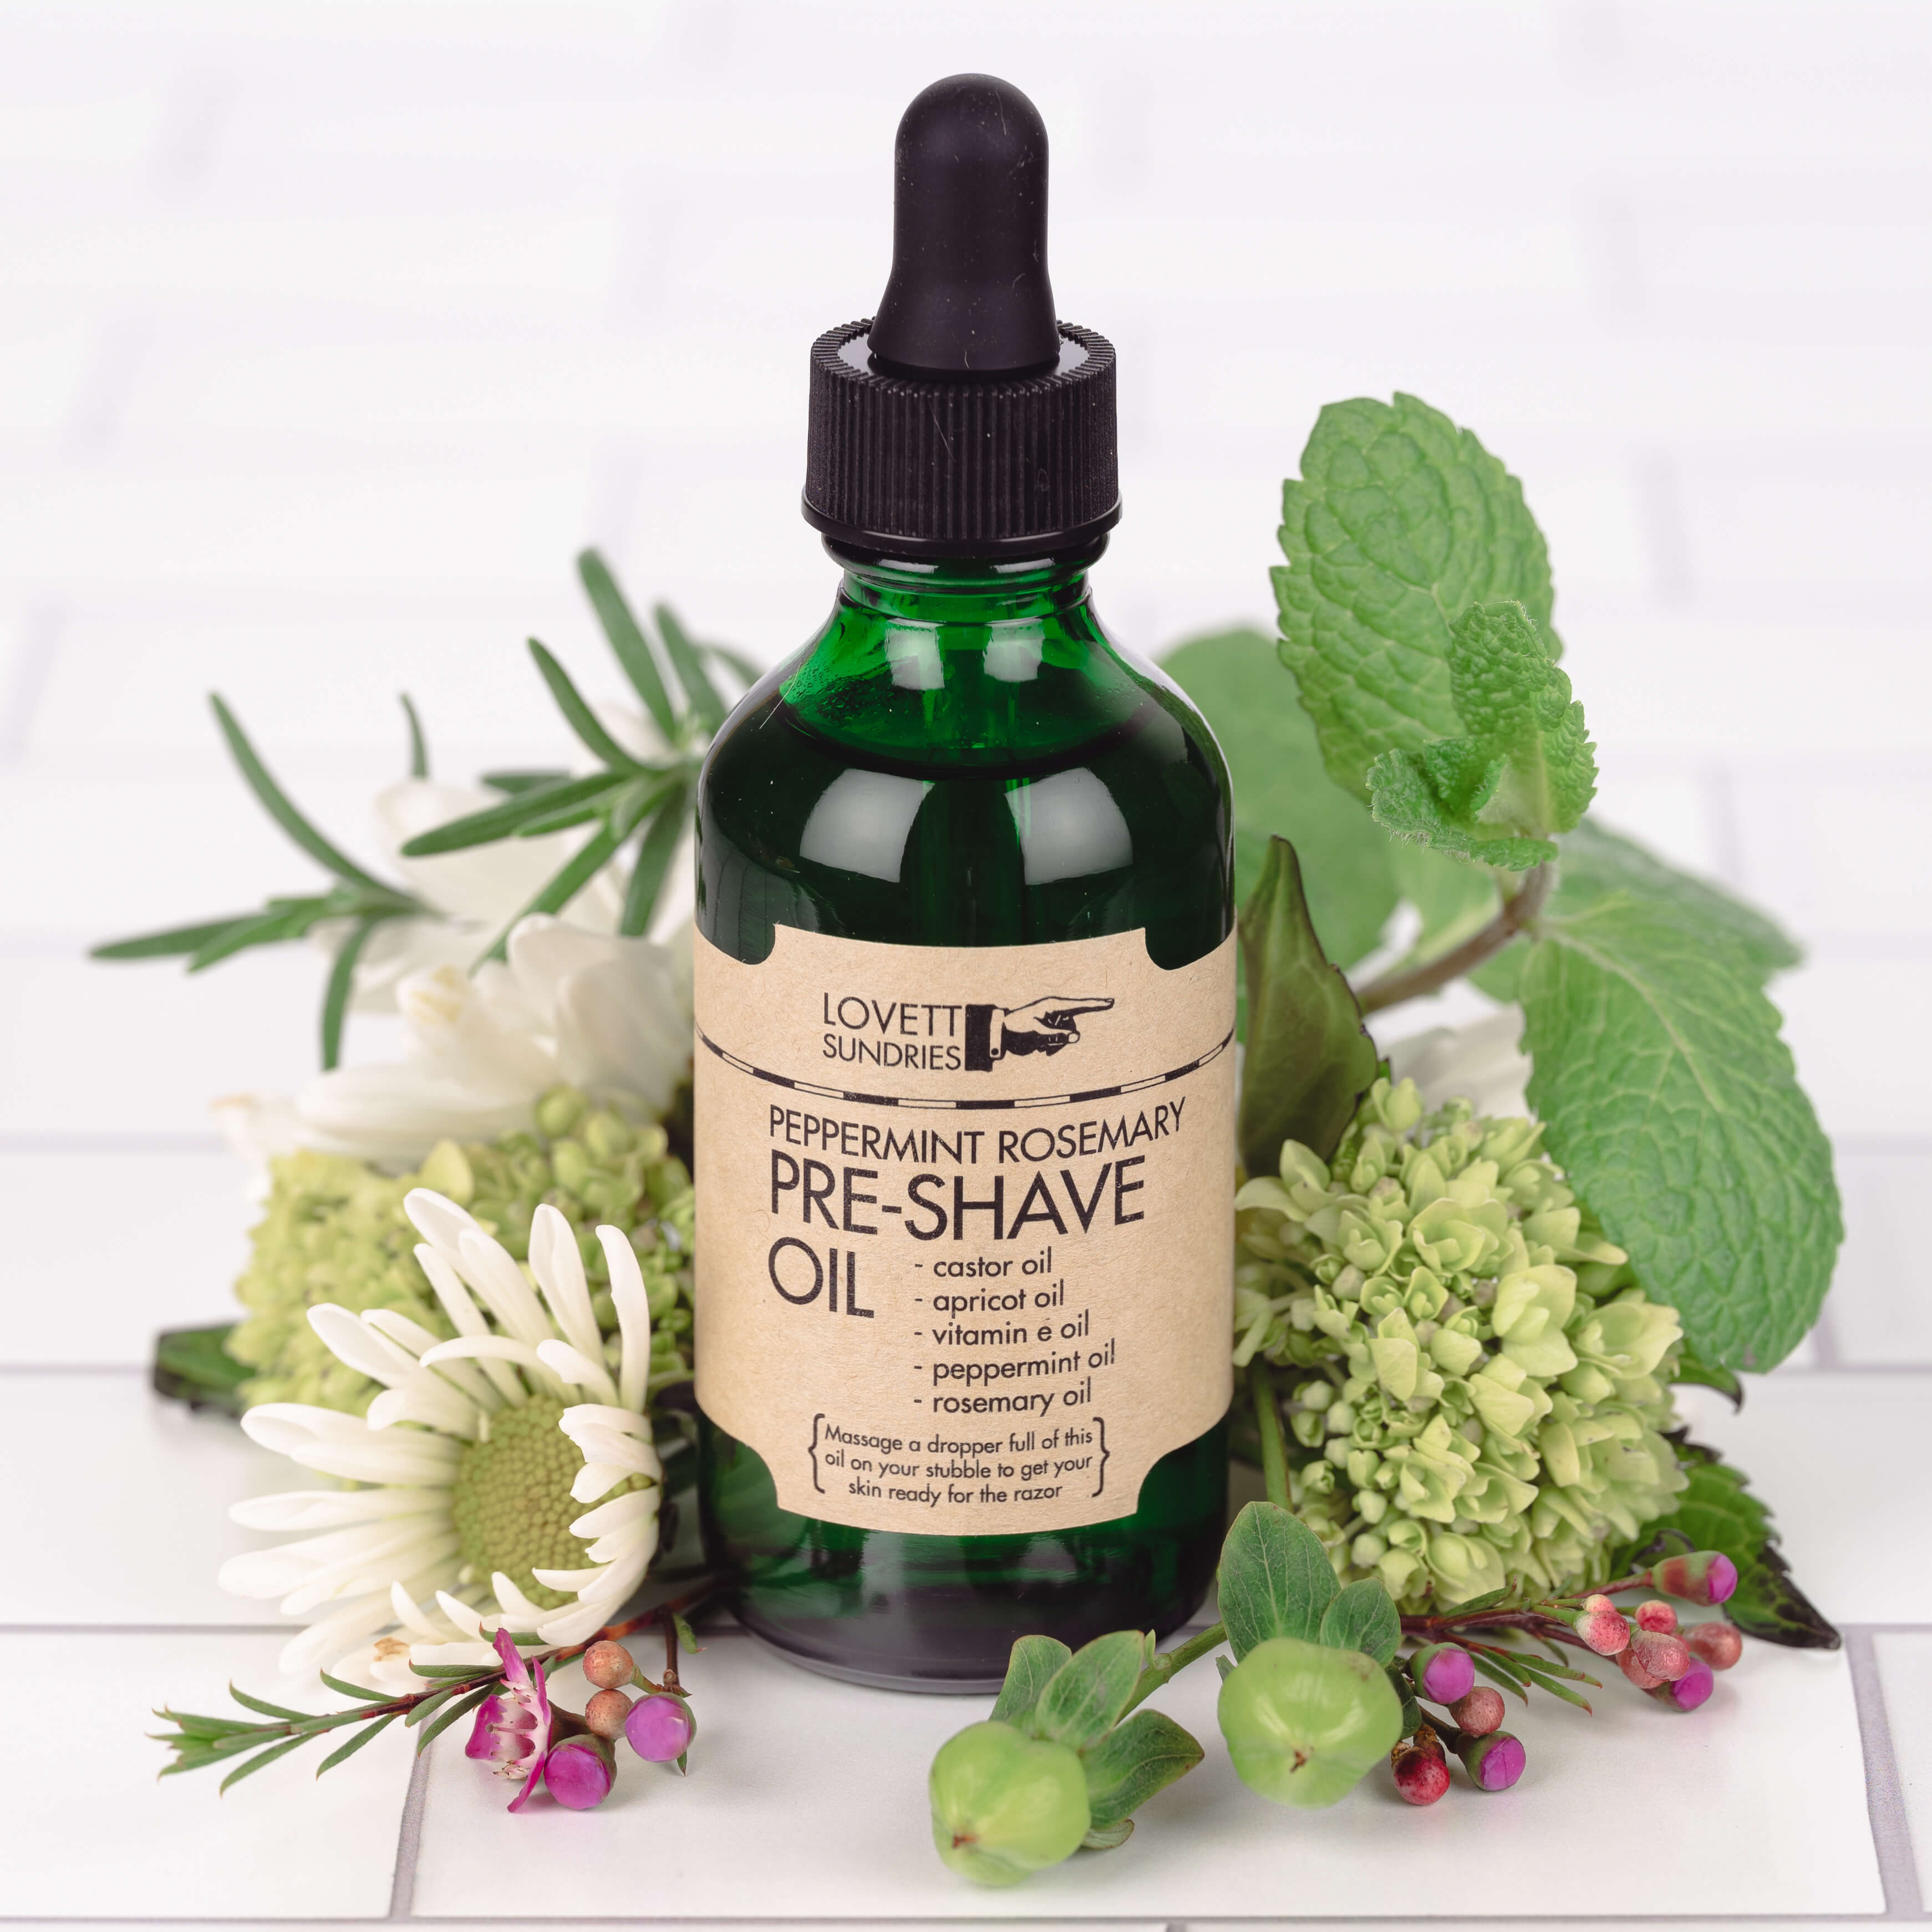 Peppermint Rosemary Shave Oil surround by flowers.